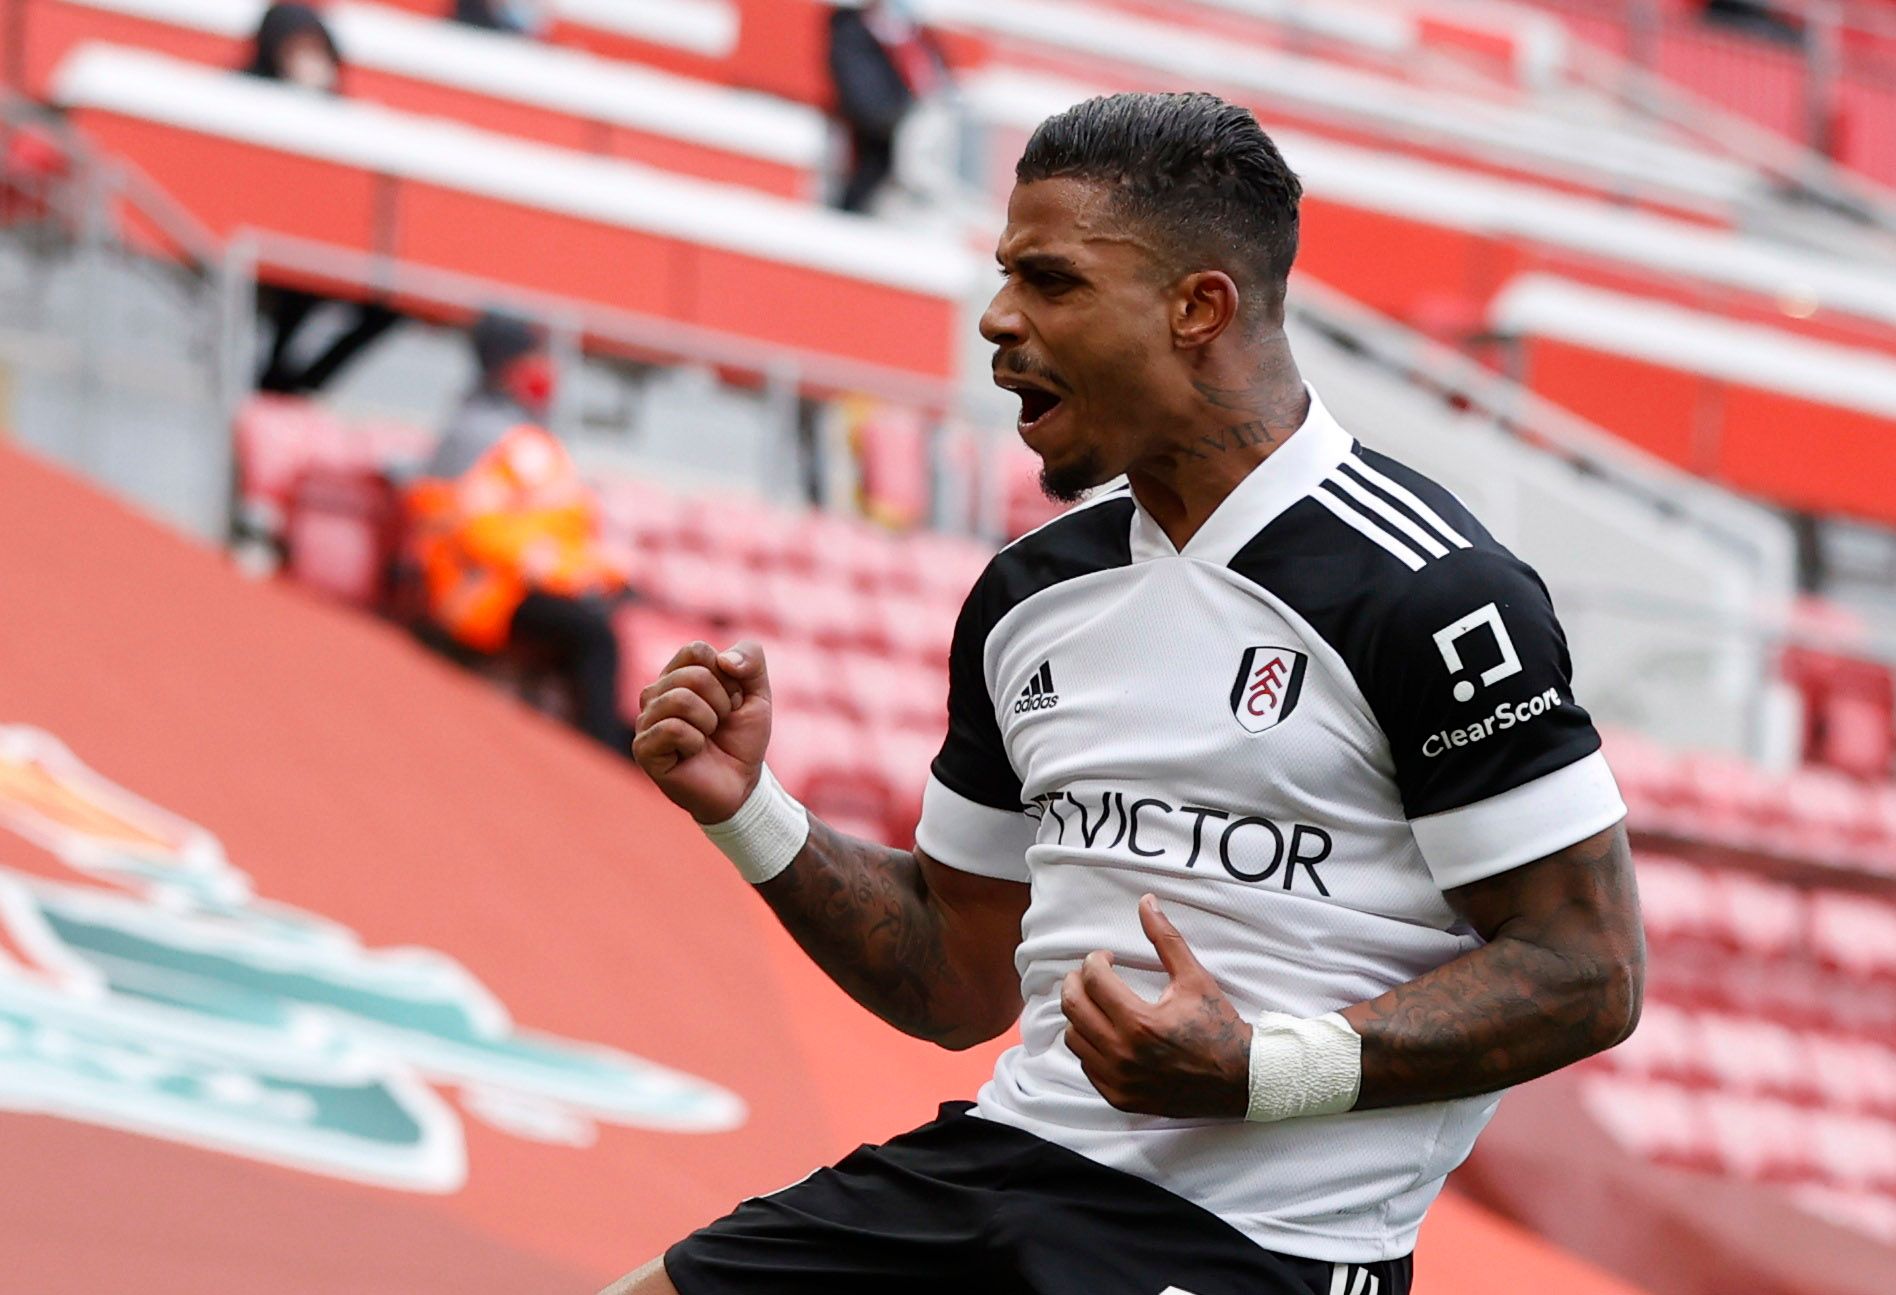 Soccer Football - Premier League - Liverpool v Fulham - Anfield, Liverpool, Britain - March 7, 2021  Fulham's Mario Lemina celebrates scoring their first goal Pool via REUTERS/Phil Noble EDITORIAL USE ONLY. No use with unauthorized audio, video, data, fixture lists, club/league logos or 'live' services. Online in-match use limited to 75 images, no video emulation. No use in betting, games or single club /league/player publications.  Please contact your account representative for further details.